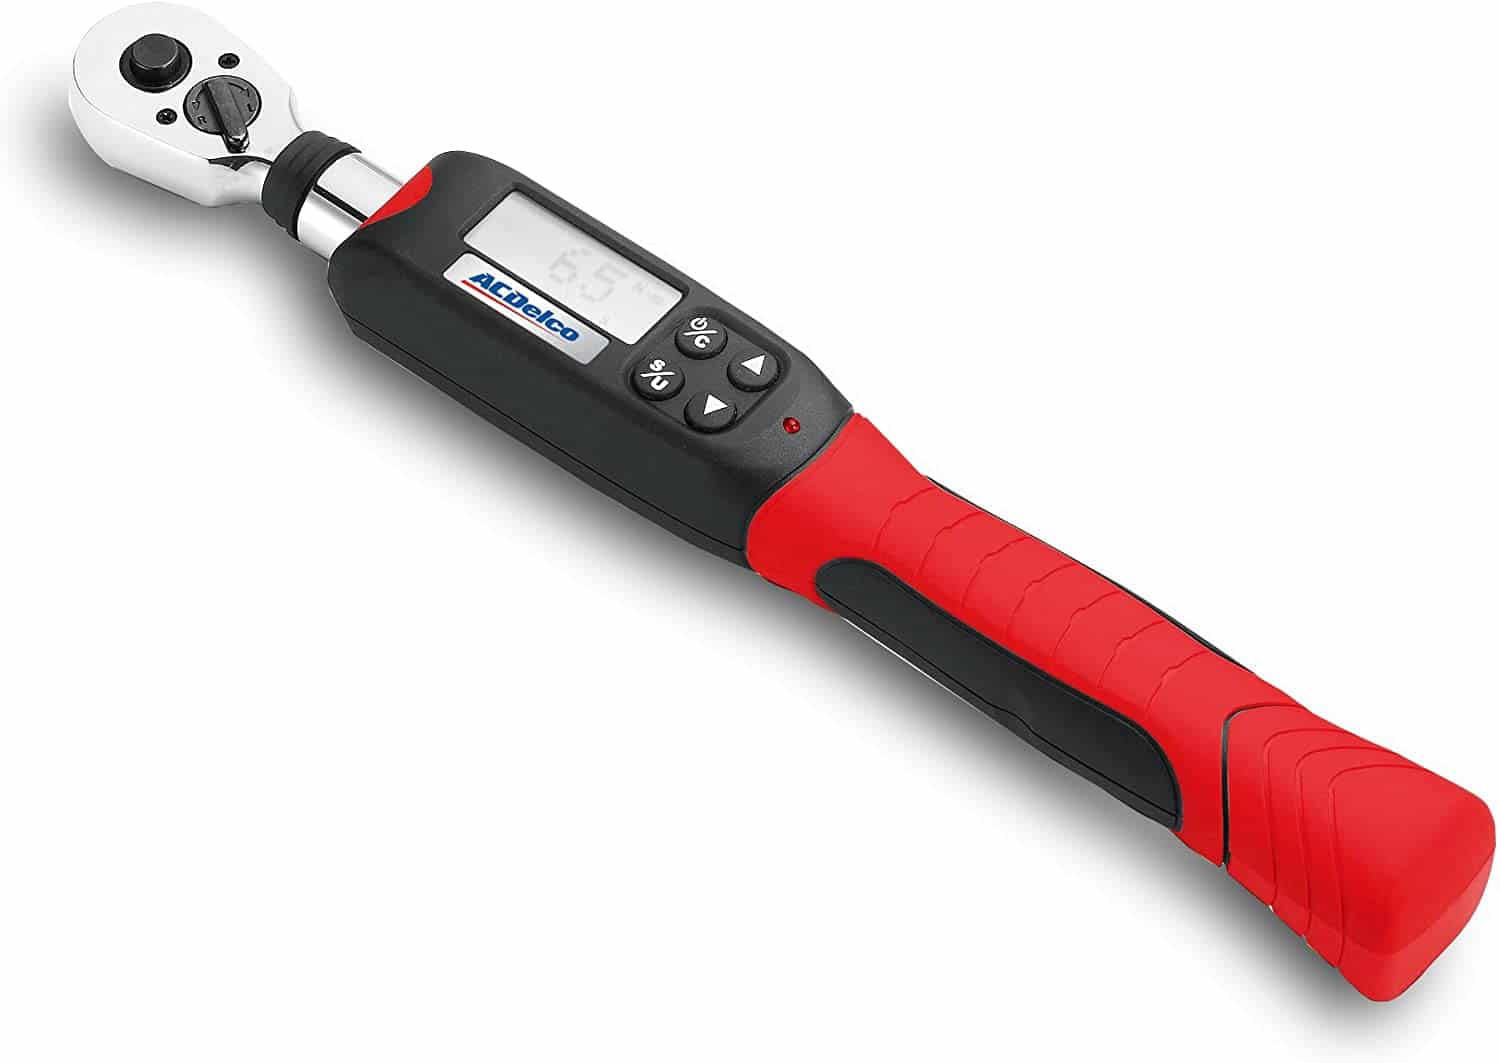 Digital Torque Wrench with Buzzer and LED Flash